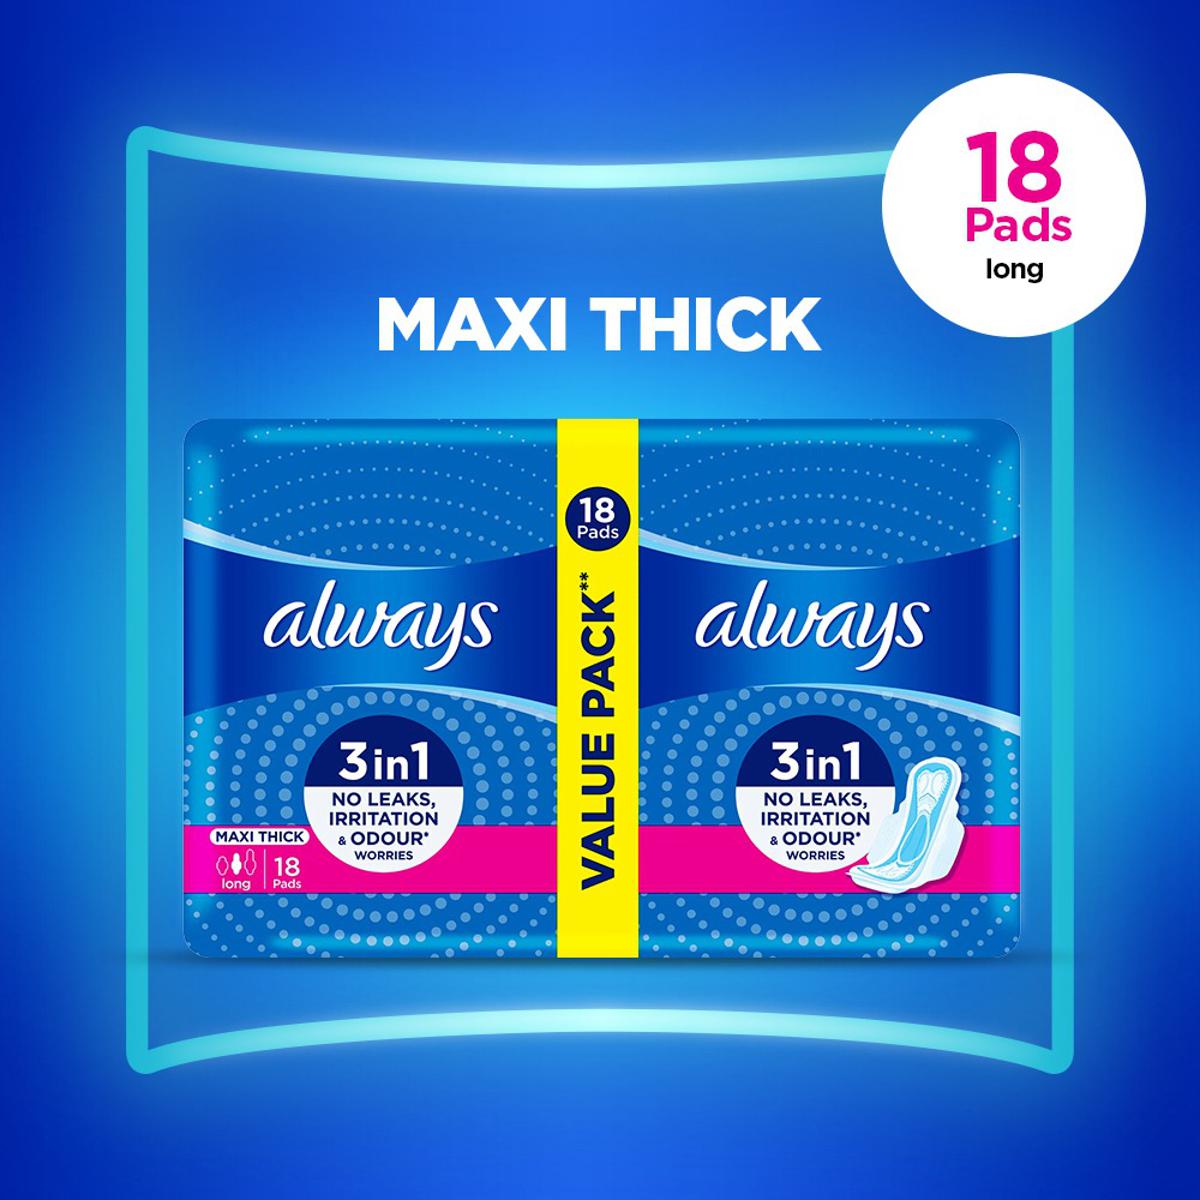 Always Thicks Maxi Sanitary Pads Long Value Pack 18 pads